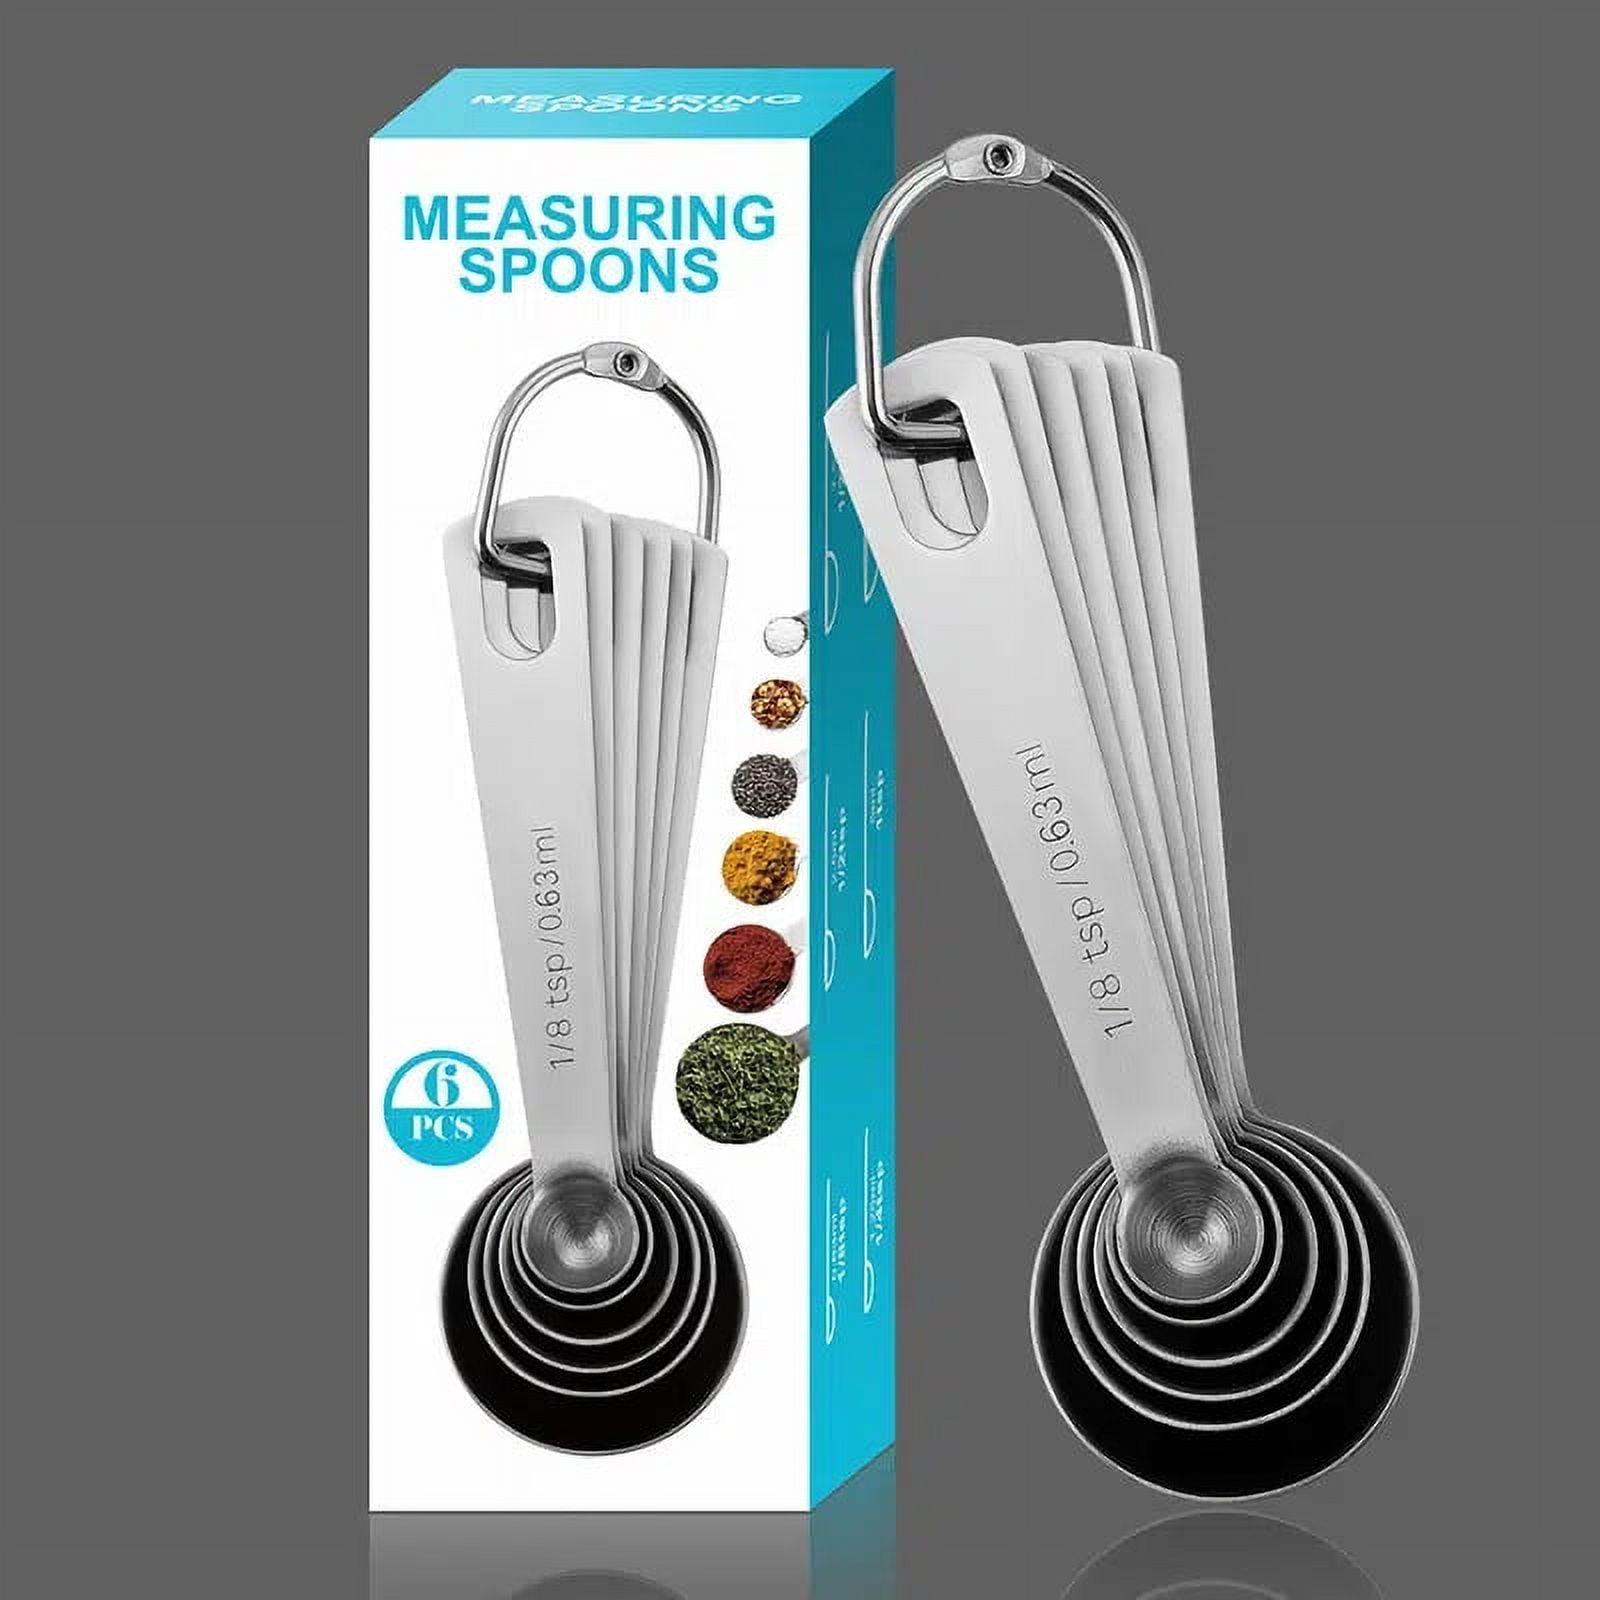 8PCS Measuring Spoons, Premium Heavy Duty 18/8 Stainless Steel Measuring  Spoons Cups Set, Small Tablespoon with Metric and US Measurements, Set of 8